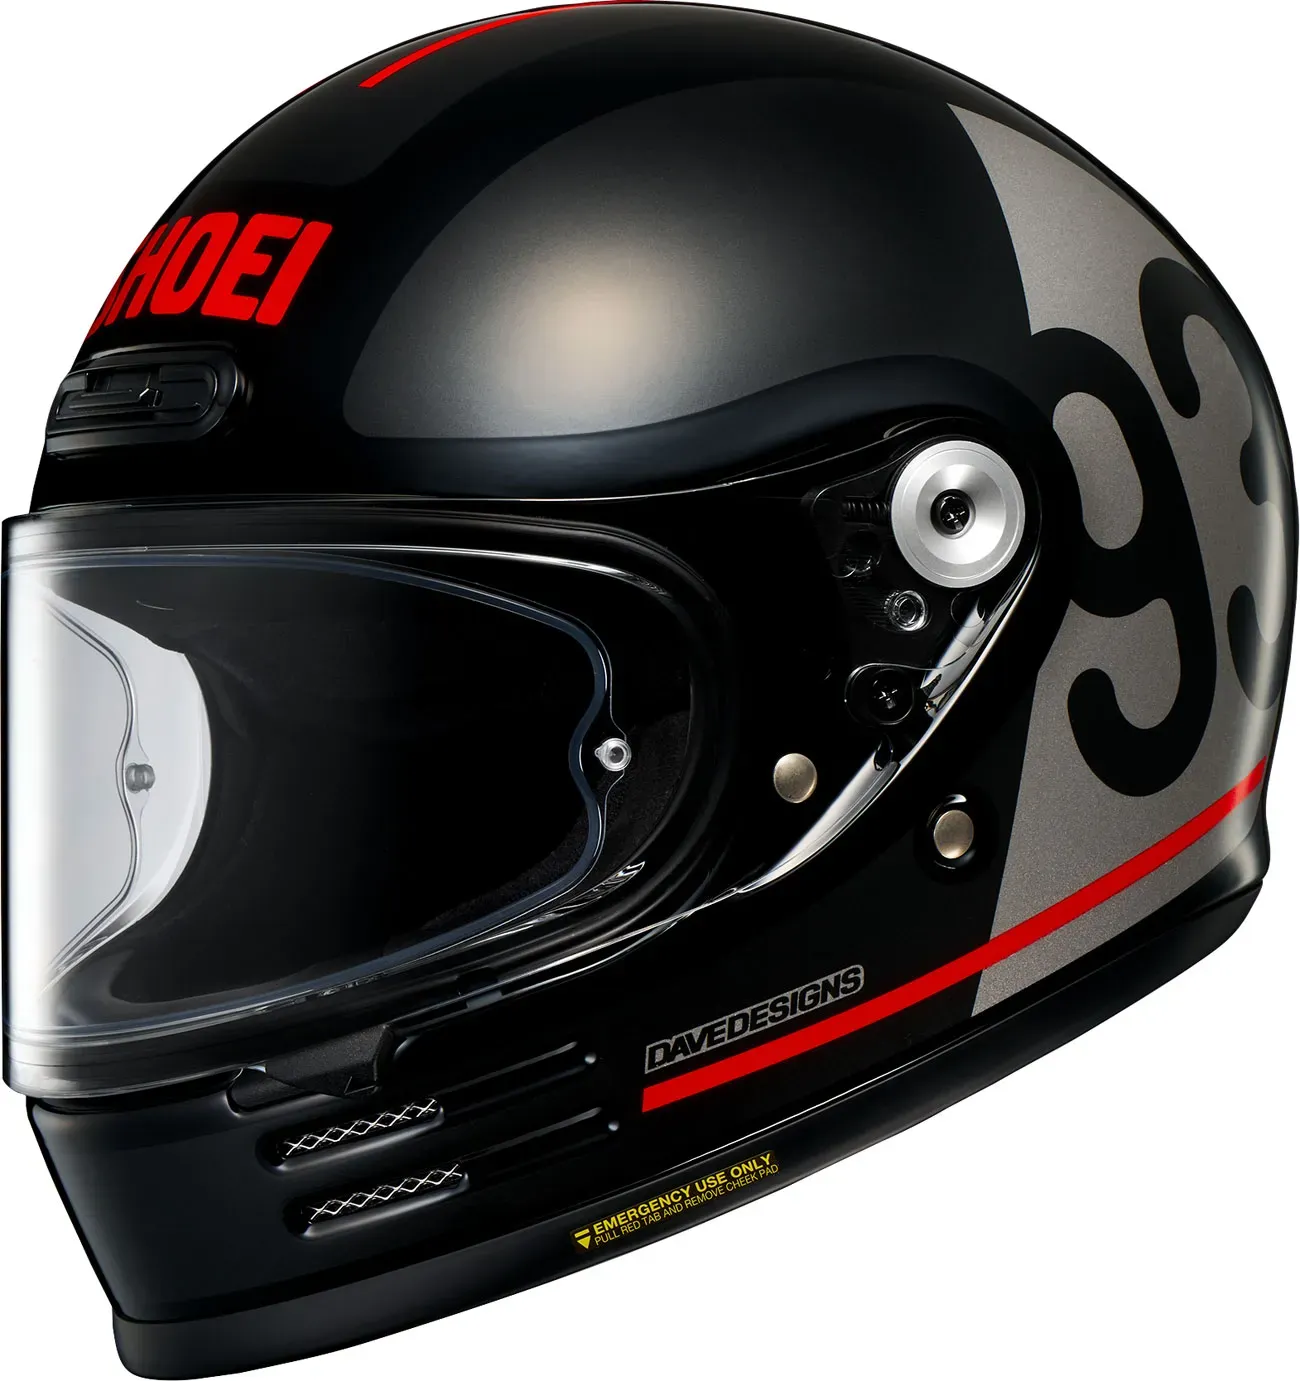 Shoei Glamster-06 MM93 Coll. Classic, casque intégral - Noir/Gris/Rouge - XS